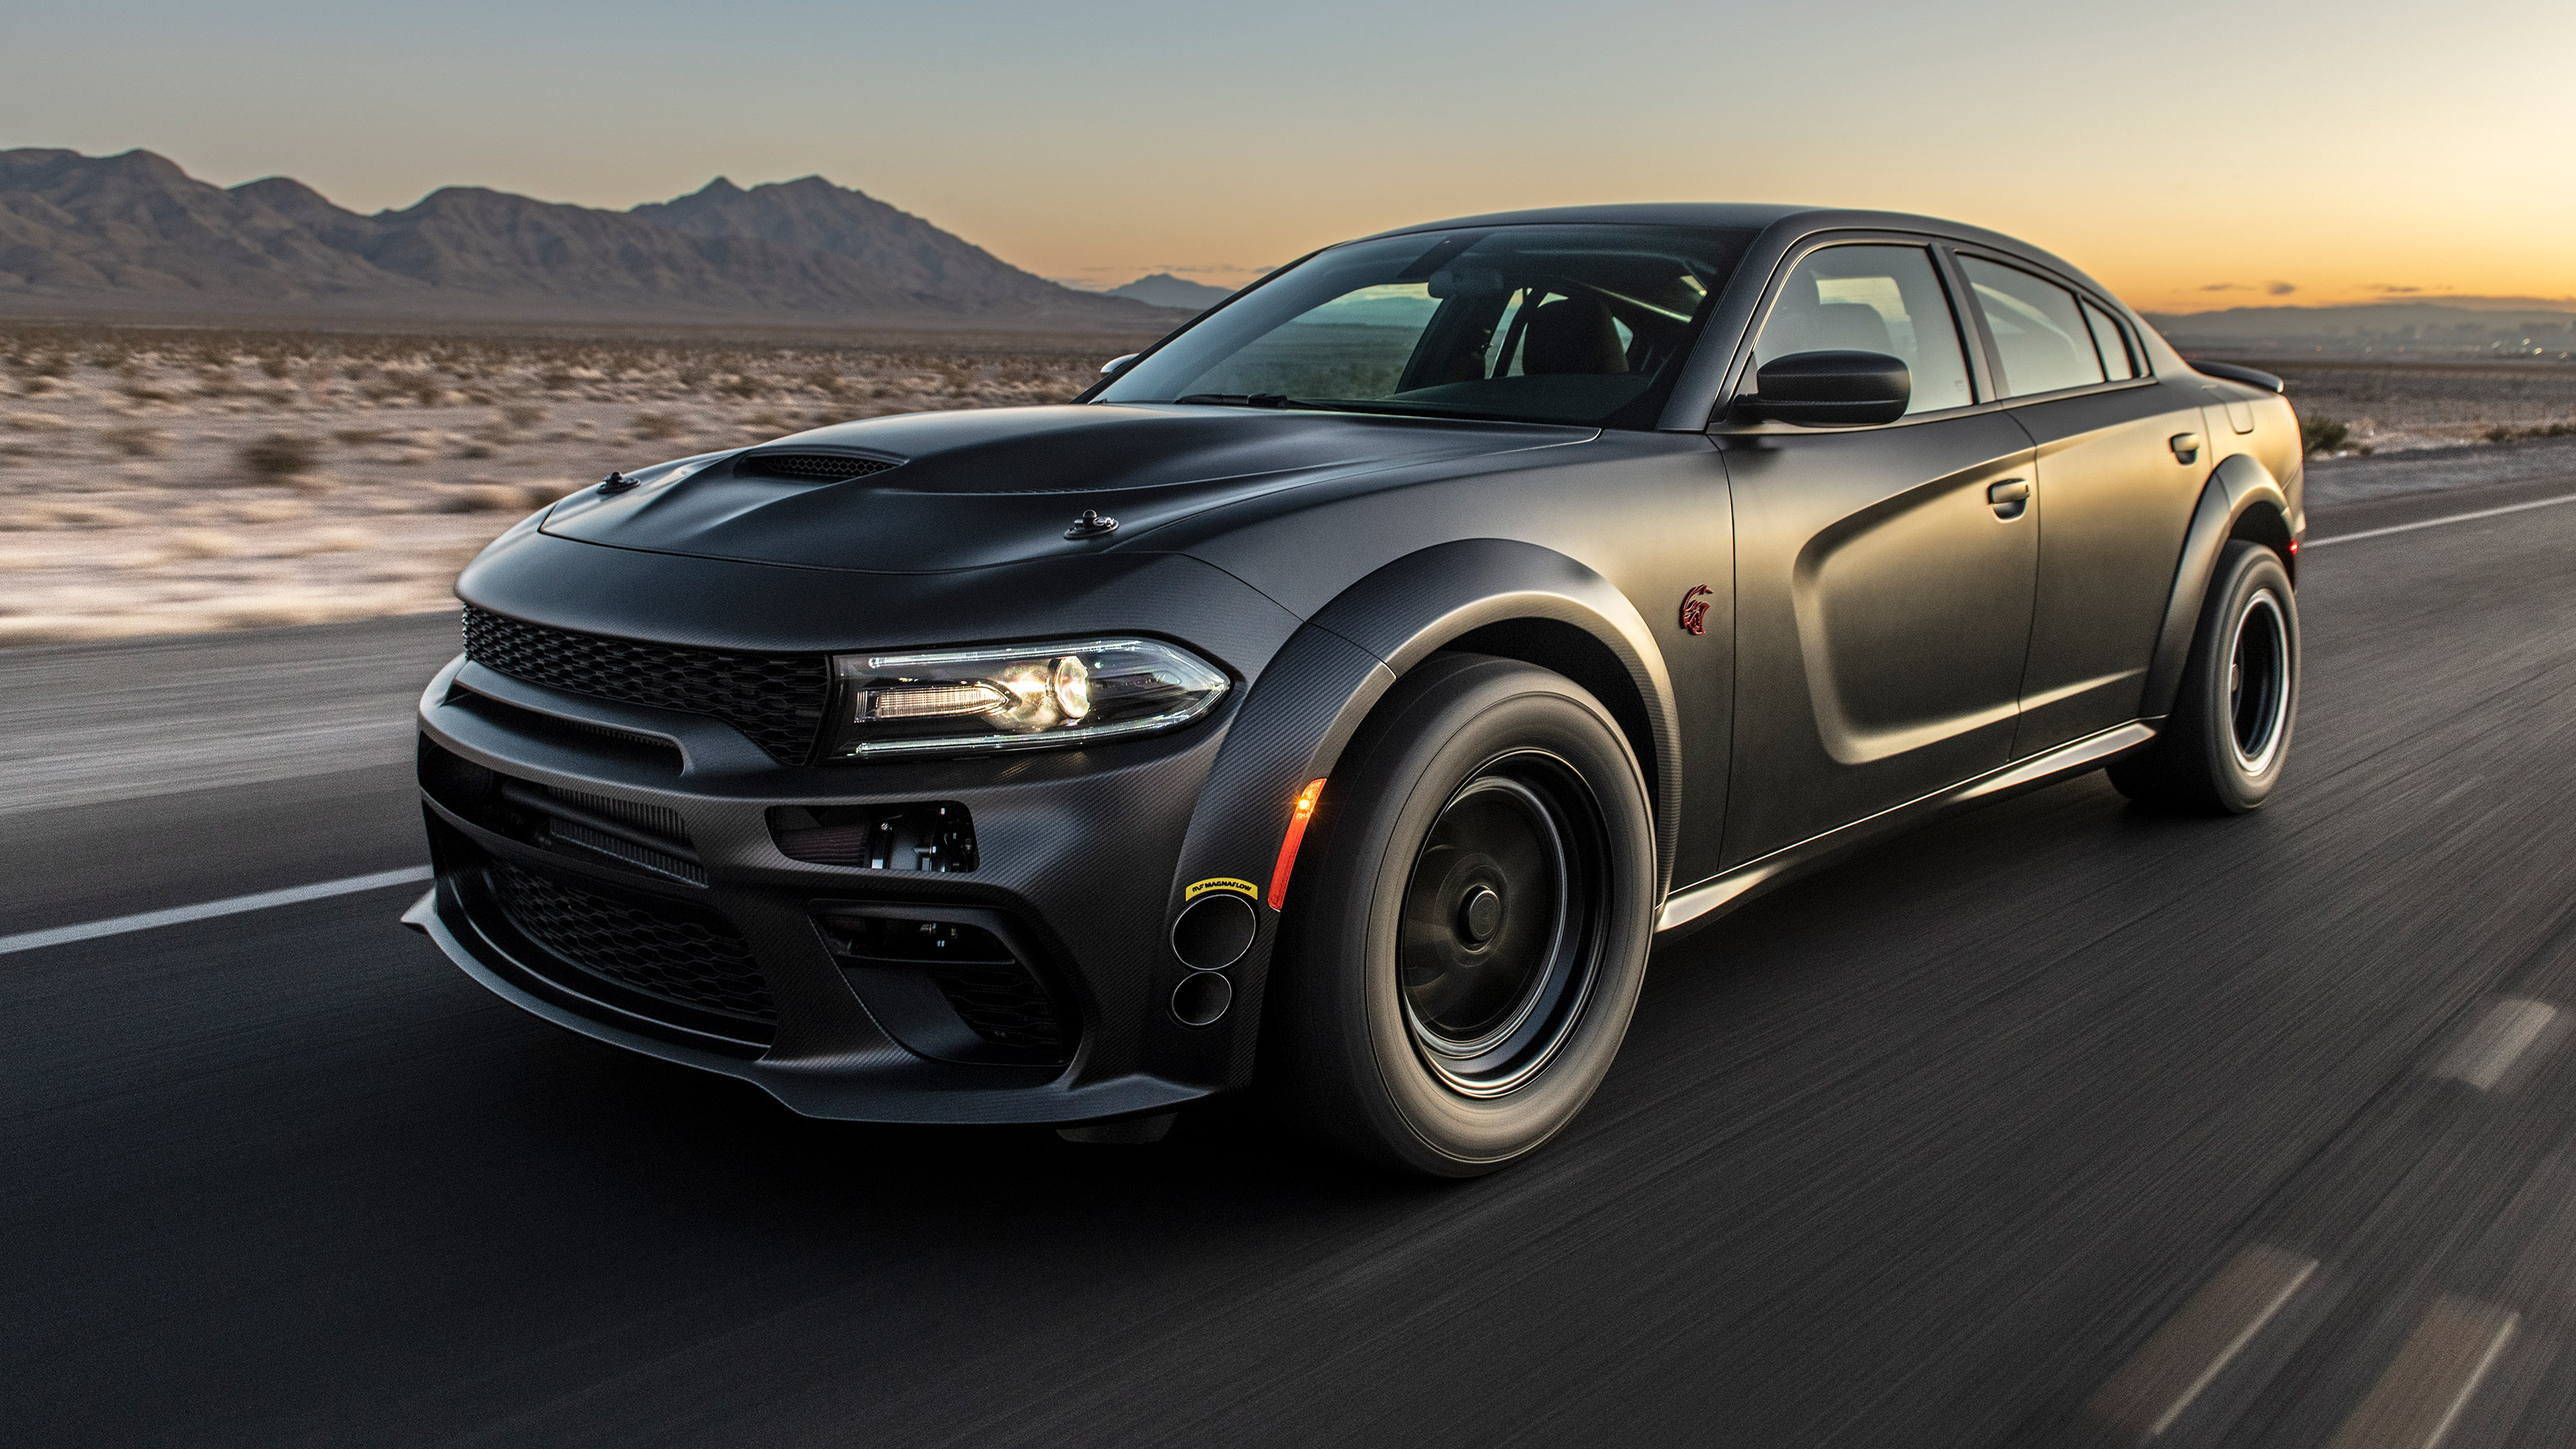 Police-spec Dodge Charger given 1500bhp, widebody kit and AWD | evo